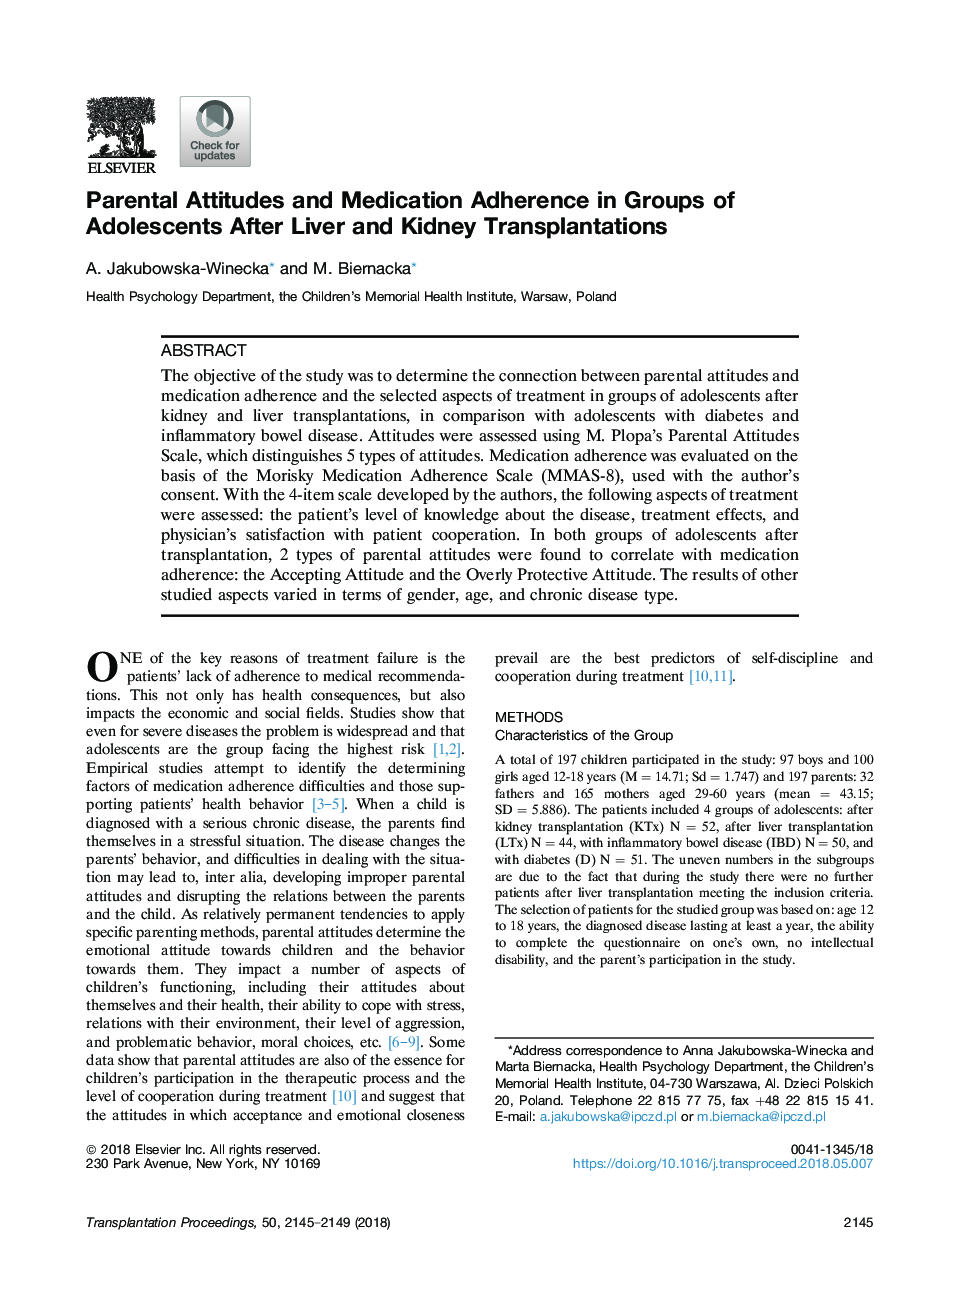 Parental Attitudes and Medication Adherence in Groups of Adolescents After Liver and Kidney Transplantations